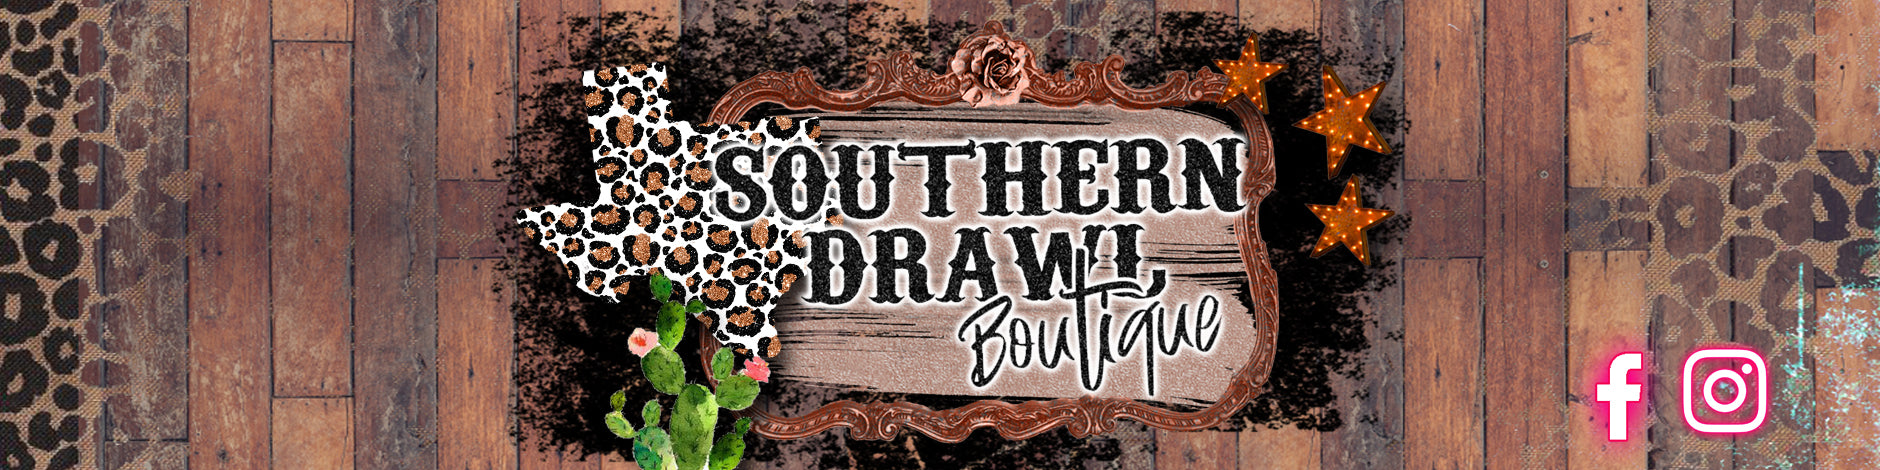 southerndrawlboutiquetx